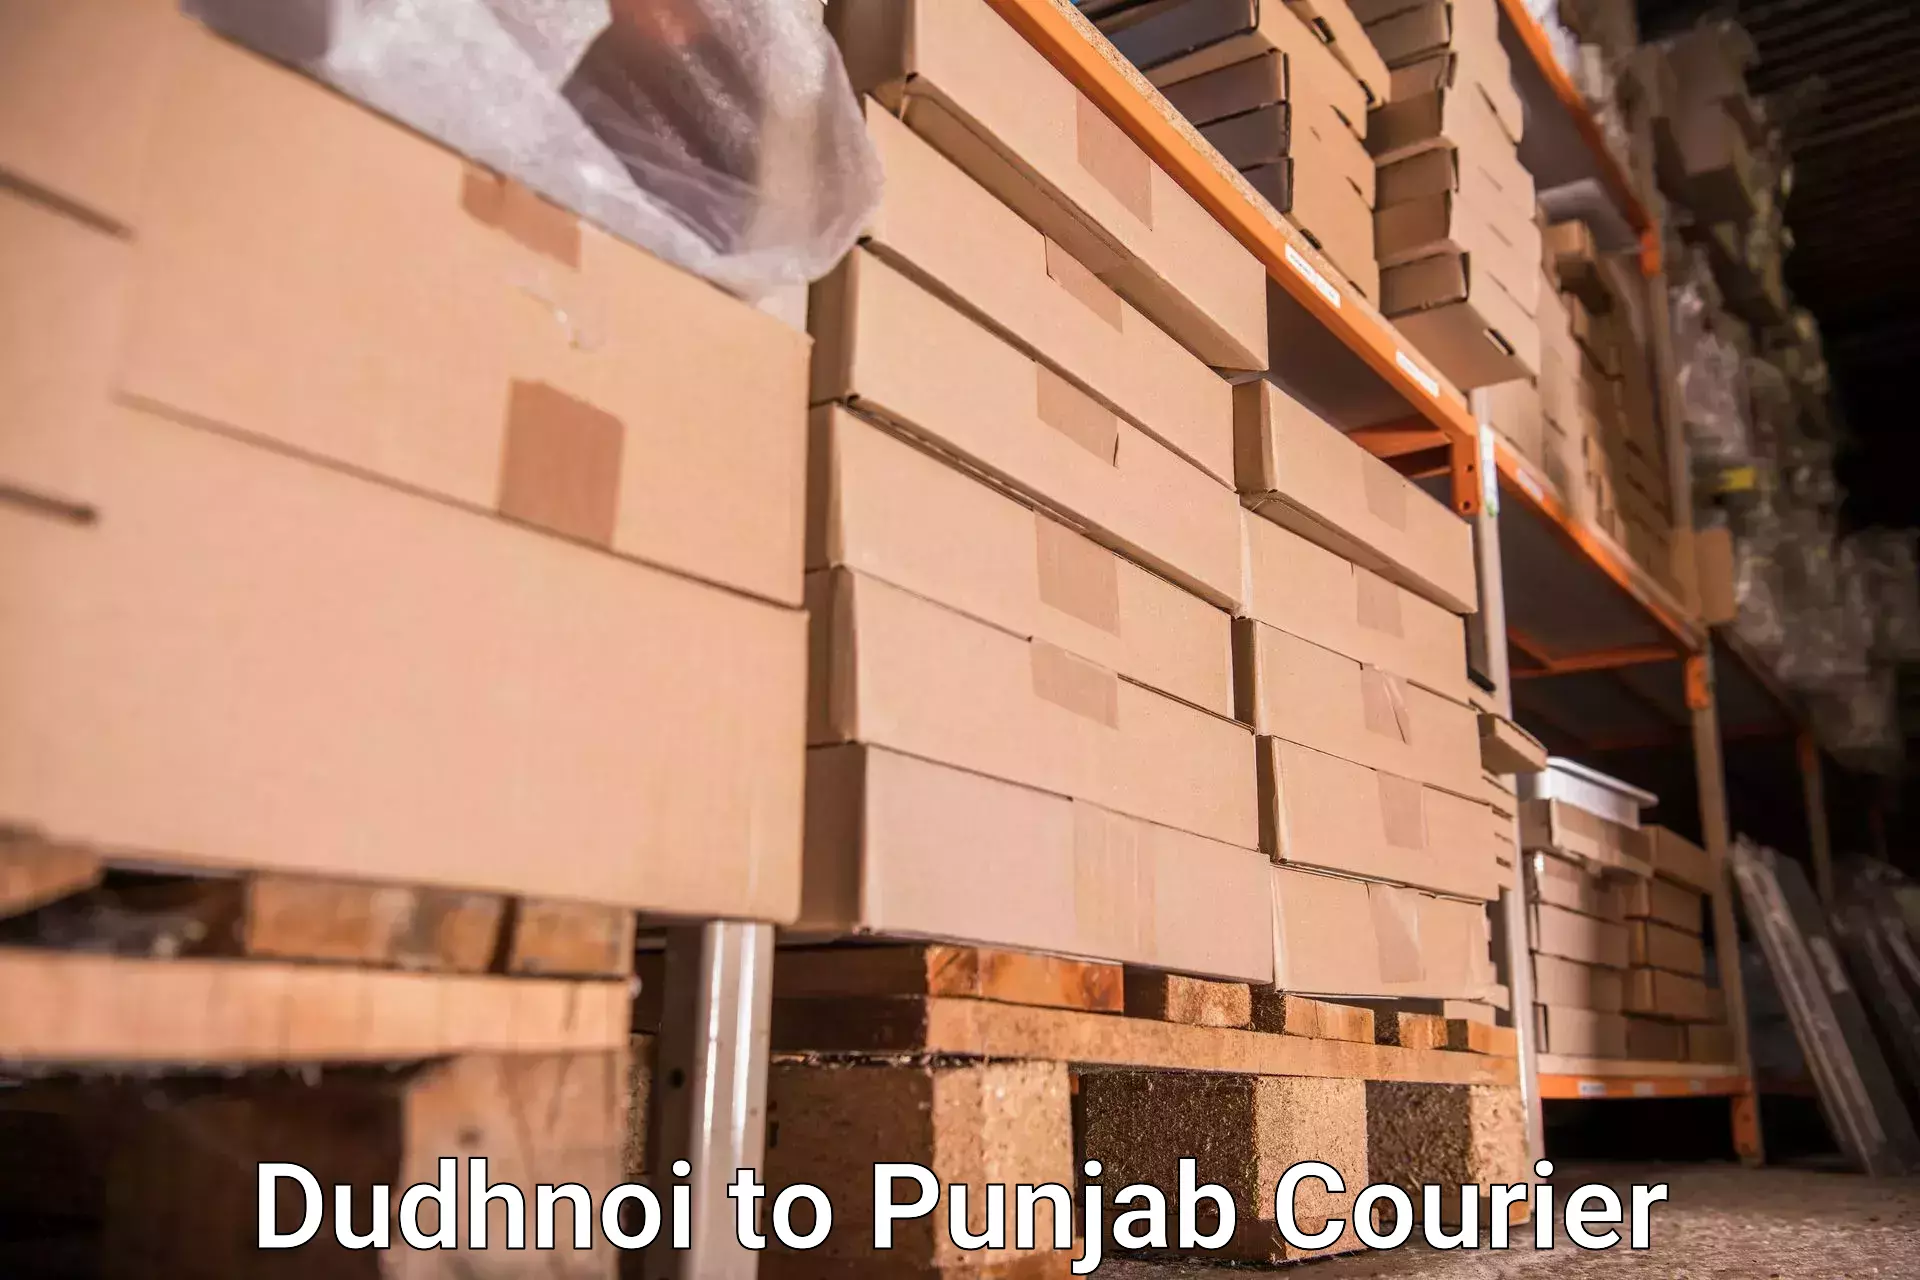 Personal effects shipping Dudhnoi to Jalandhar